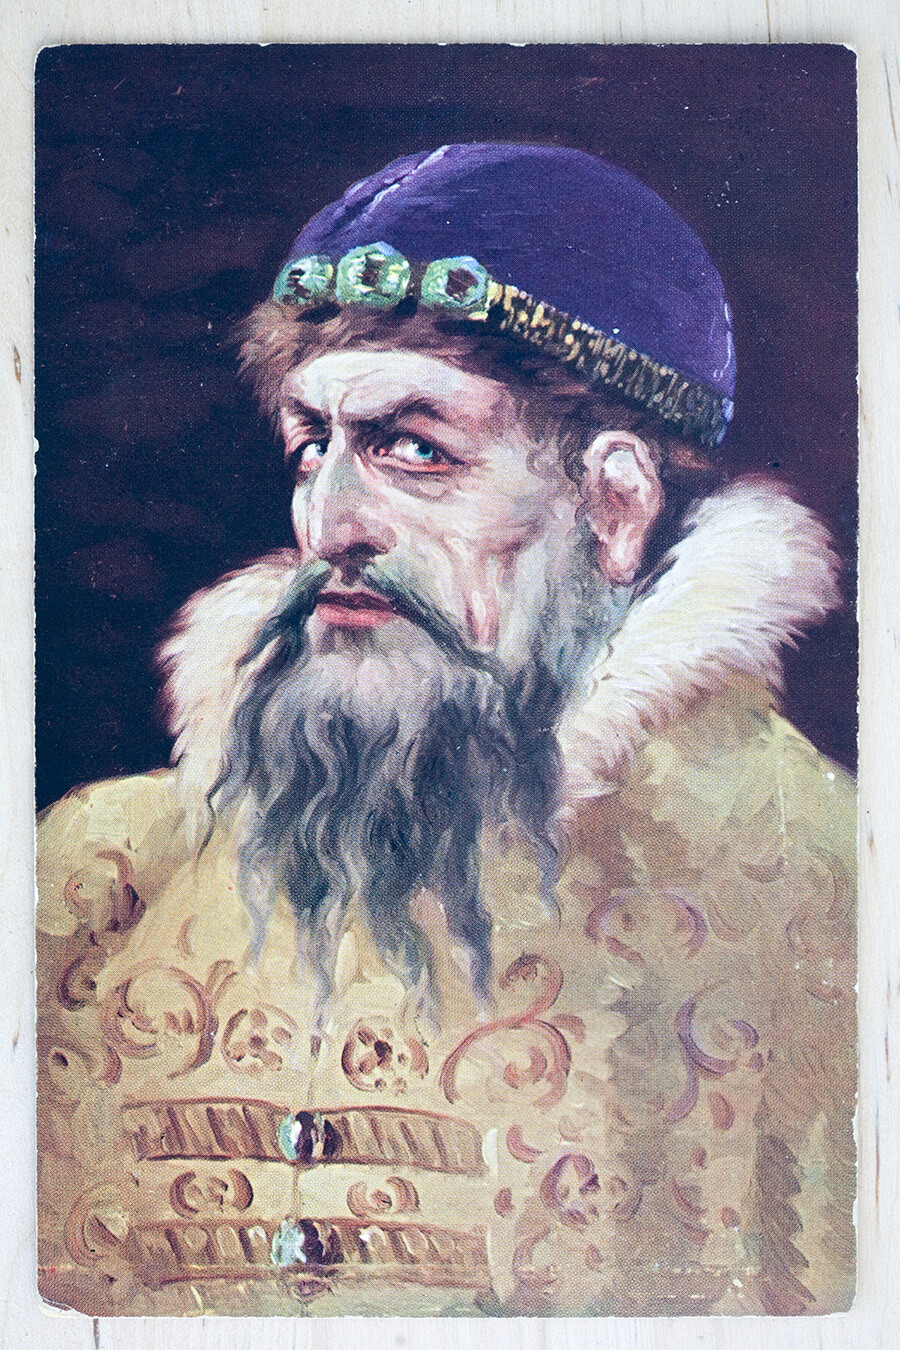 Early 20th century Russian postcard of Ivan the Terrible.